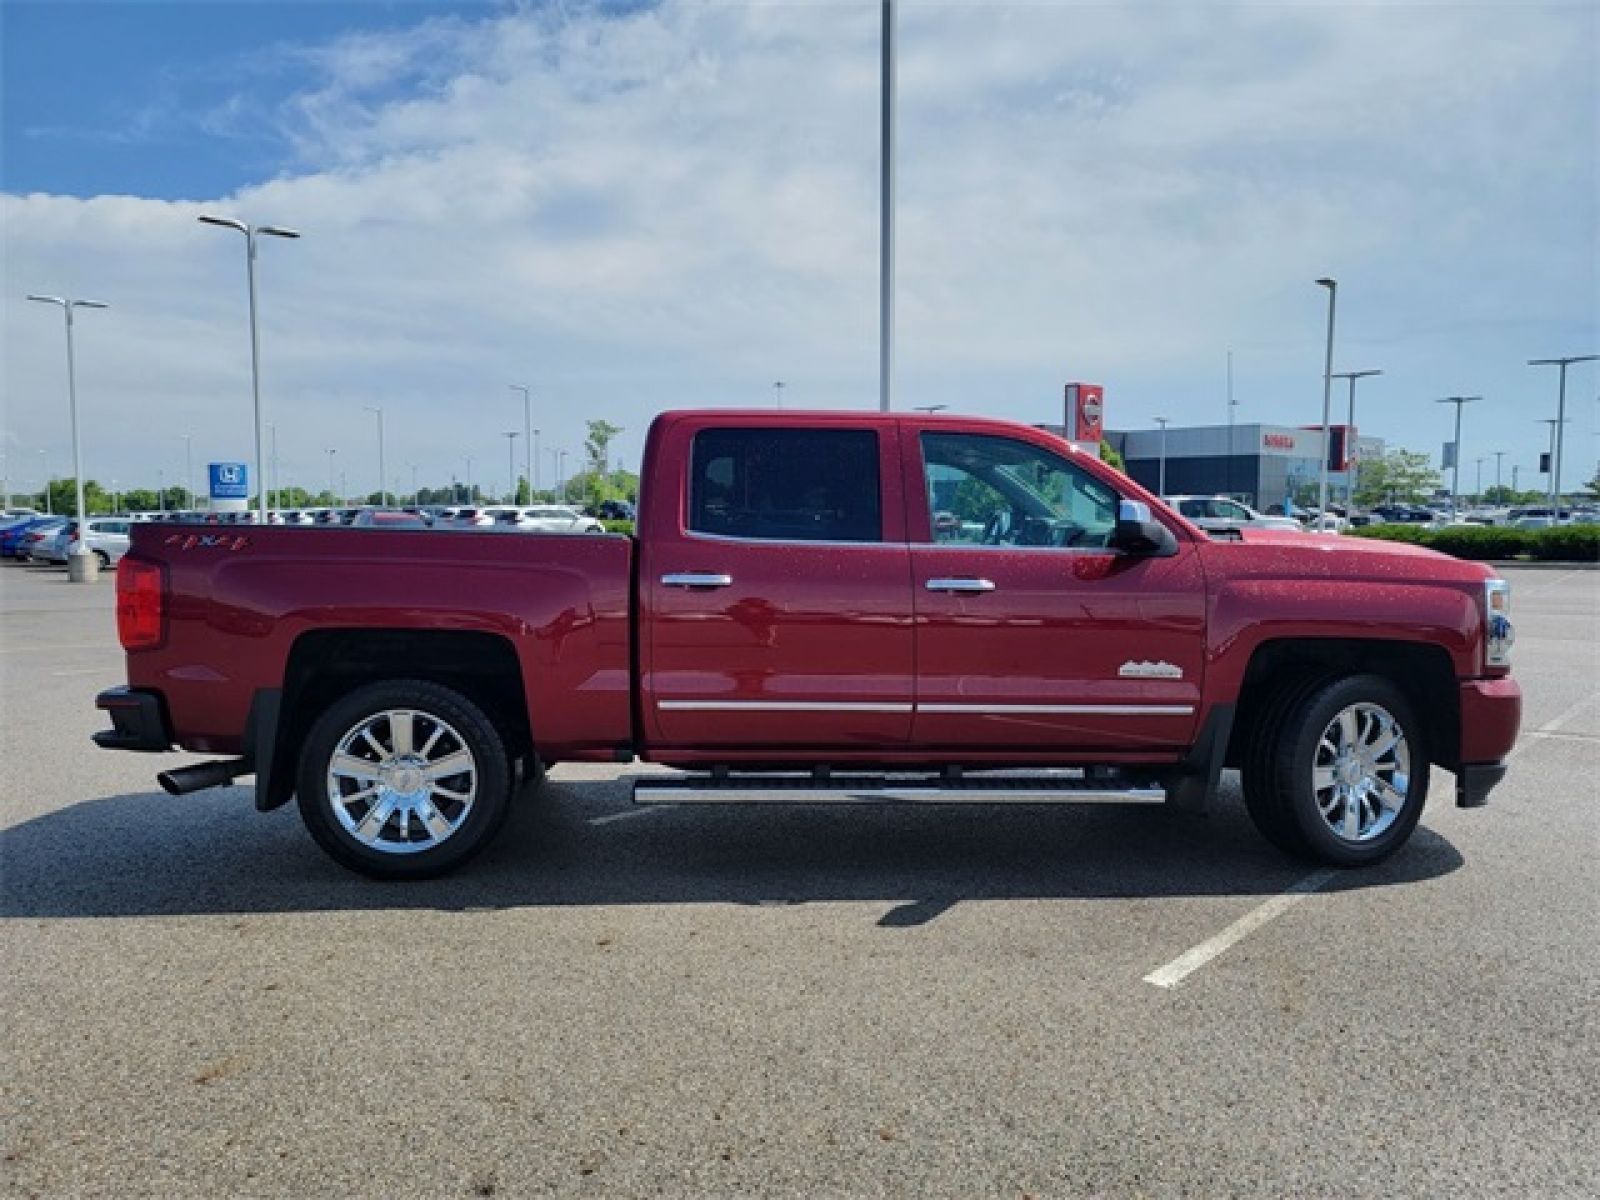 Used, 2018 Chevrolet Silverado 1500 High Country, Red, 14048-2